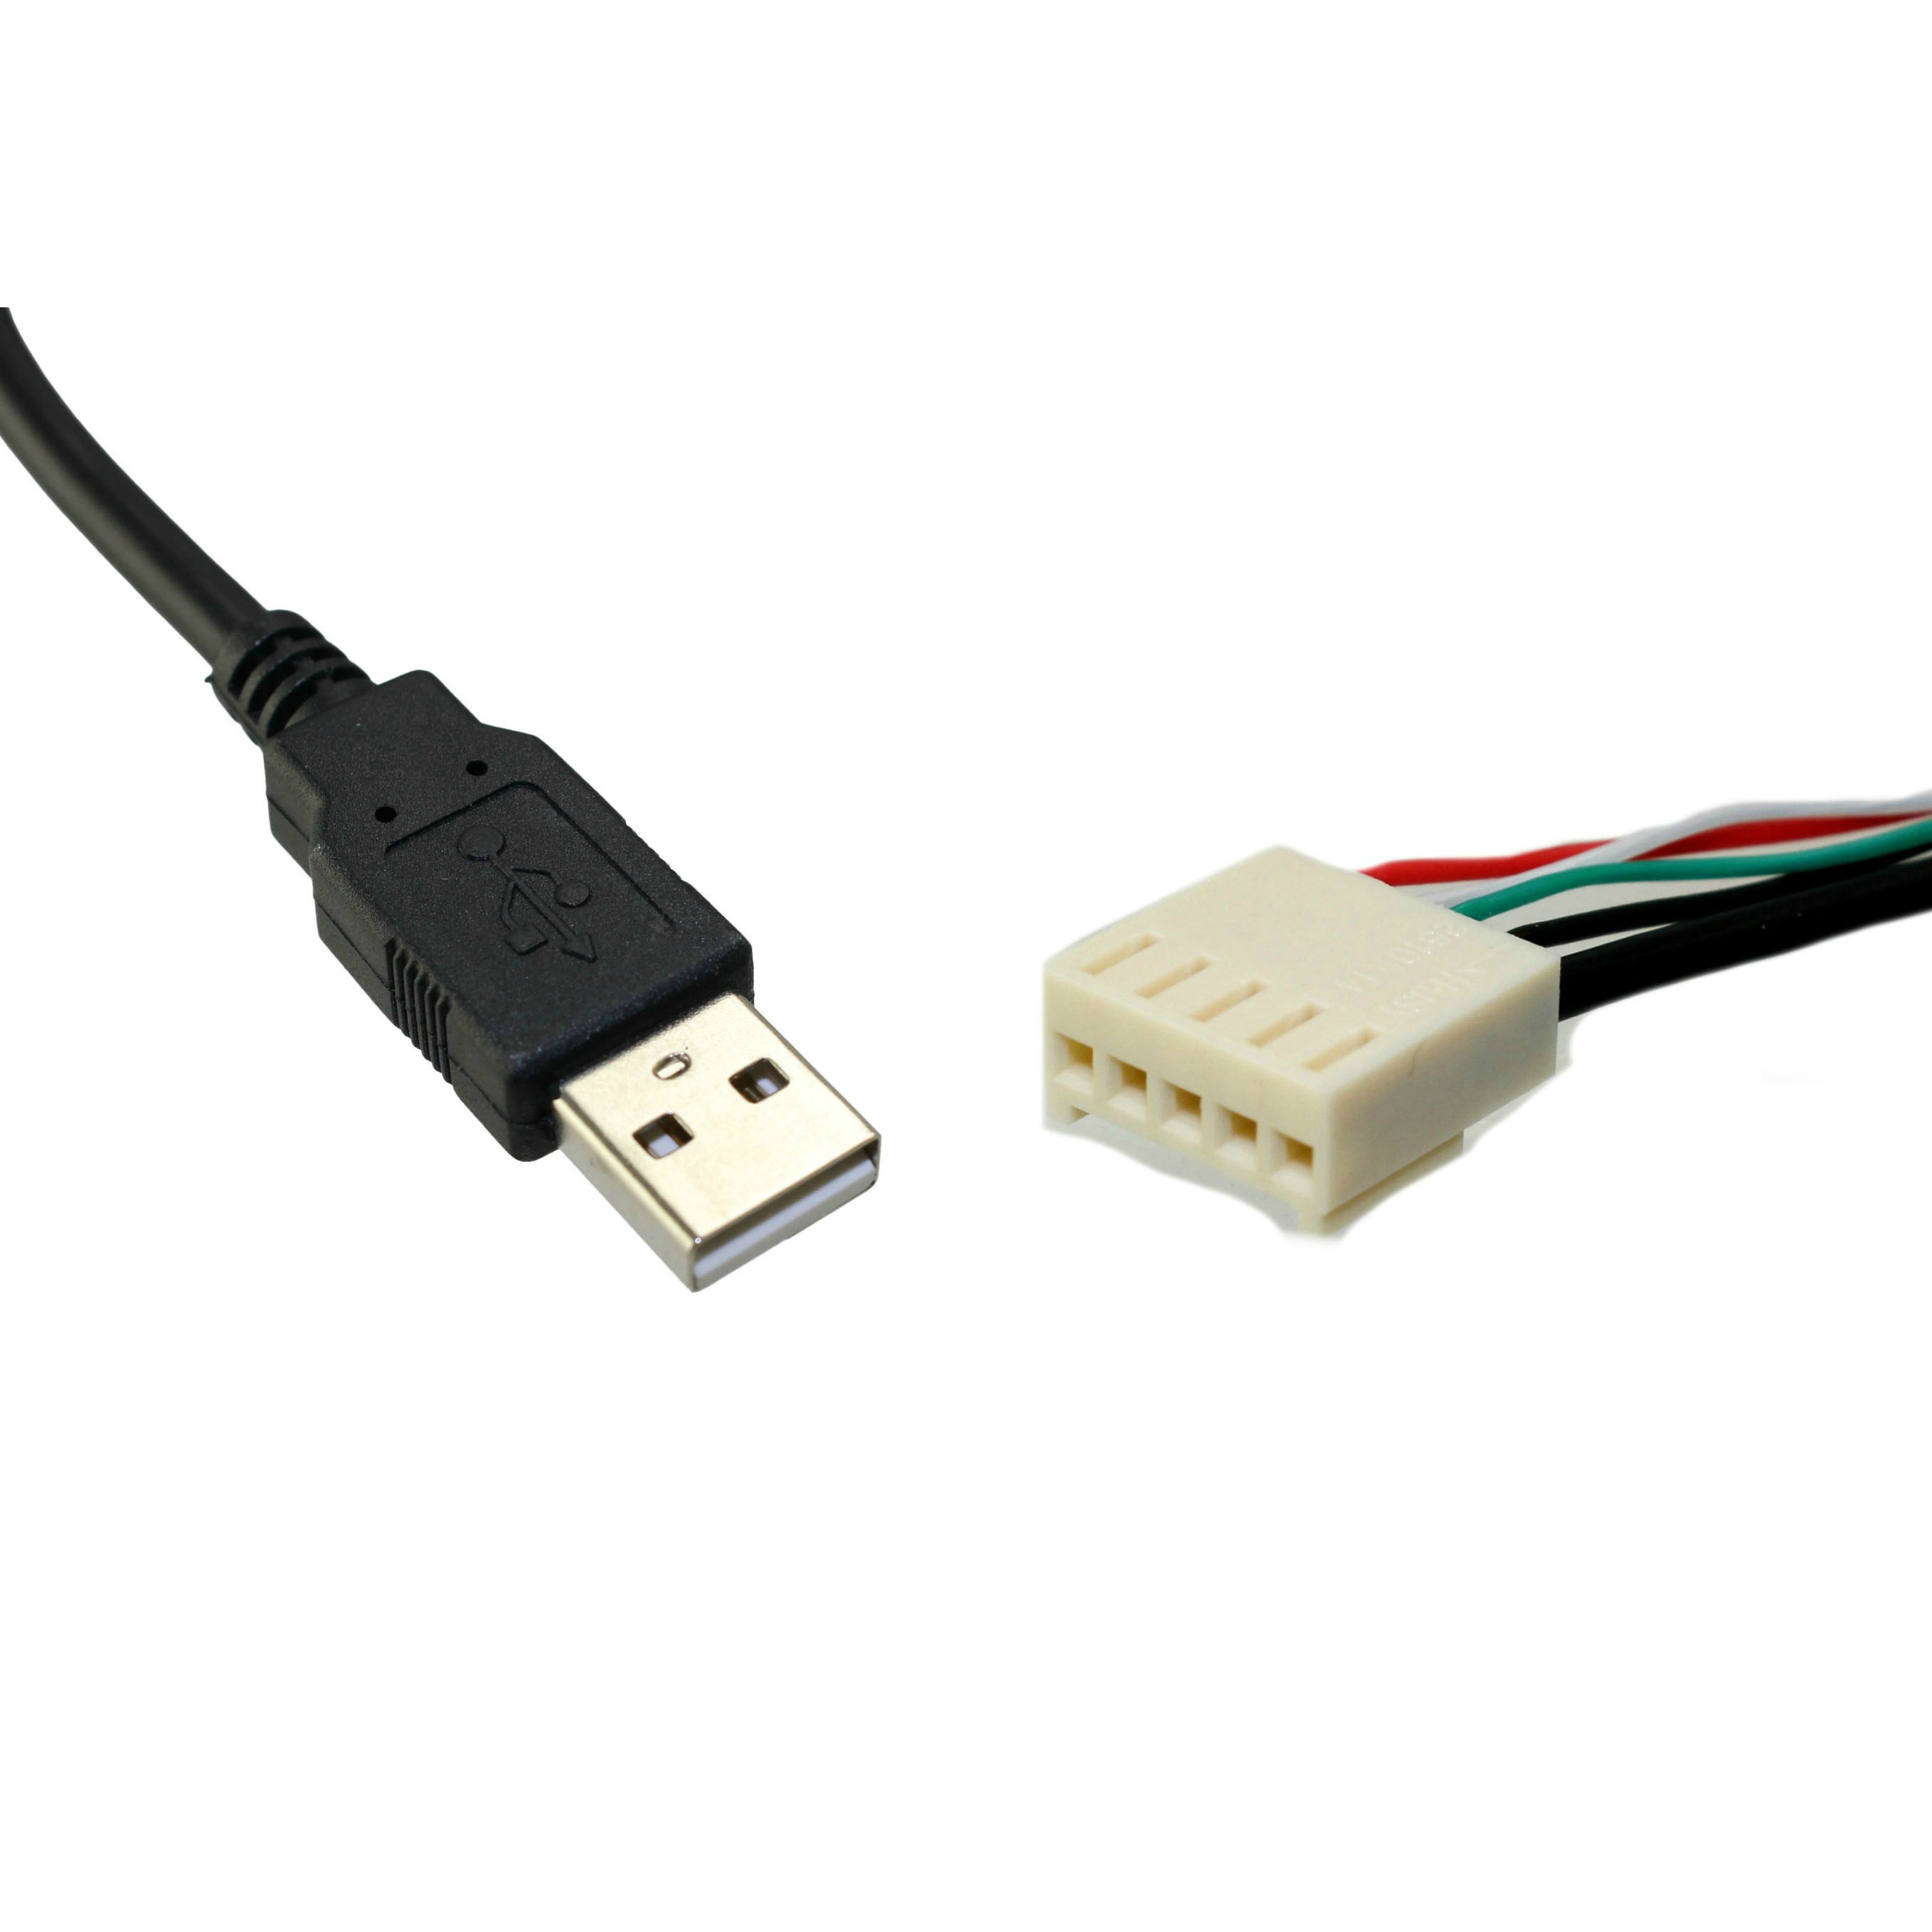 【REPCABLE】USB CABLE